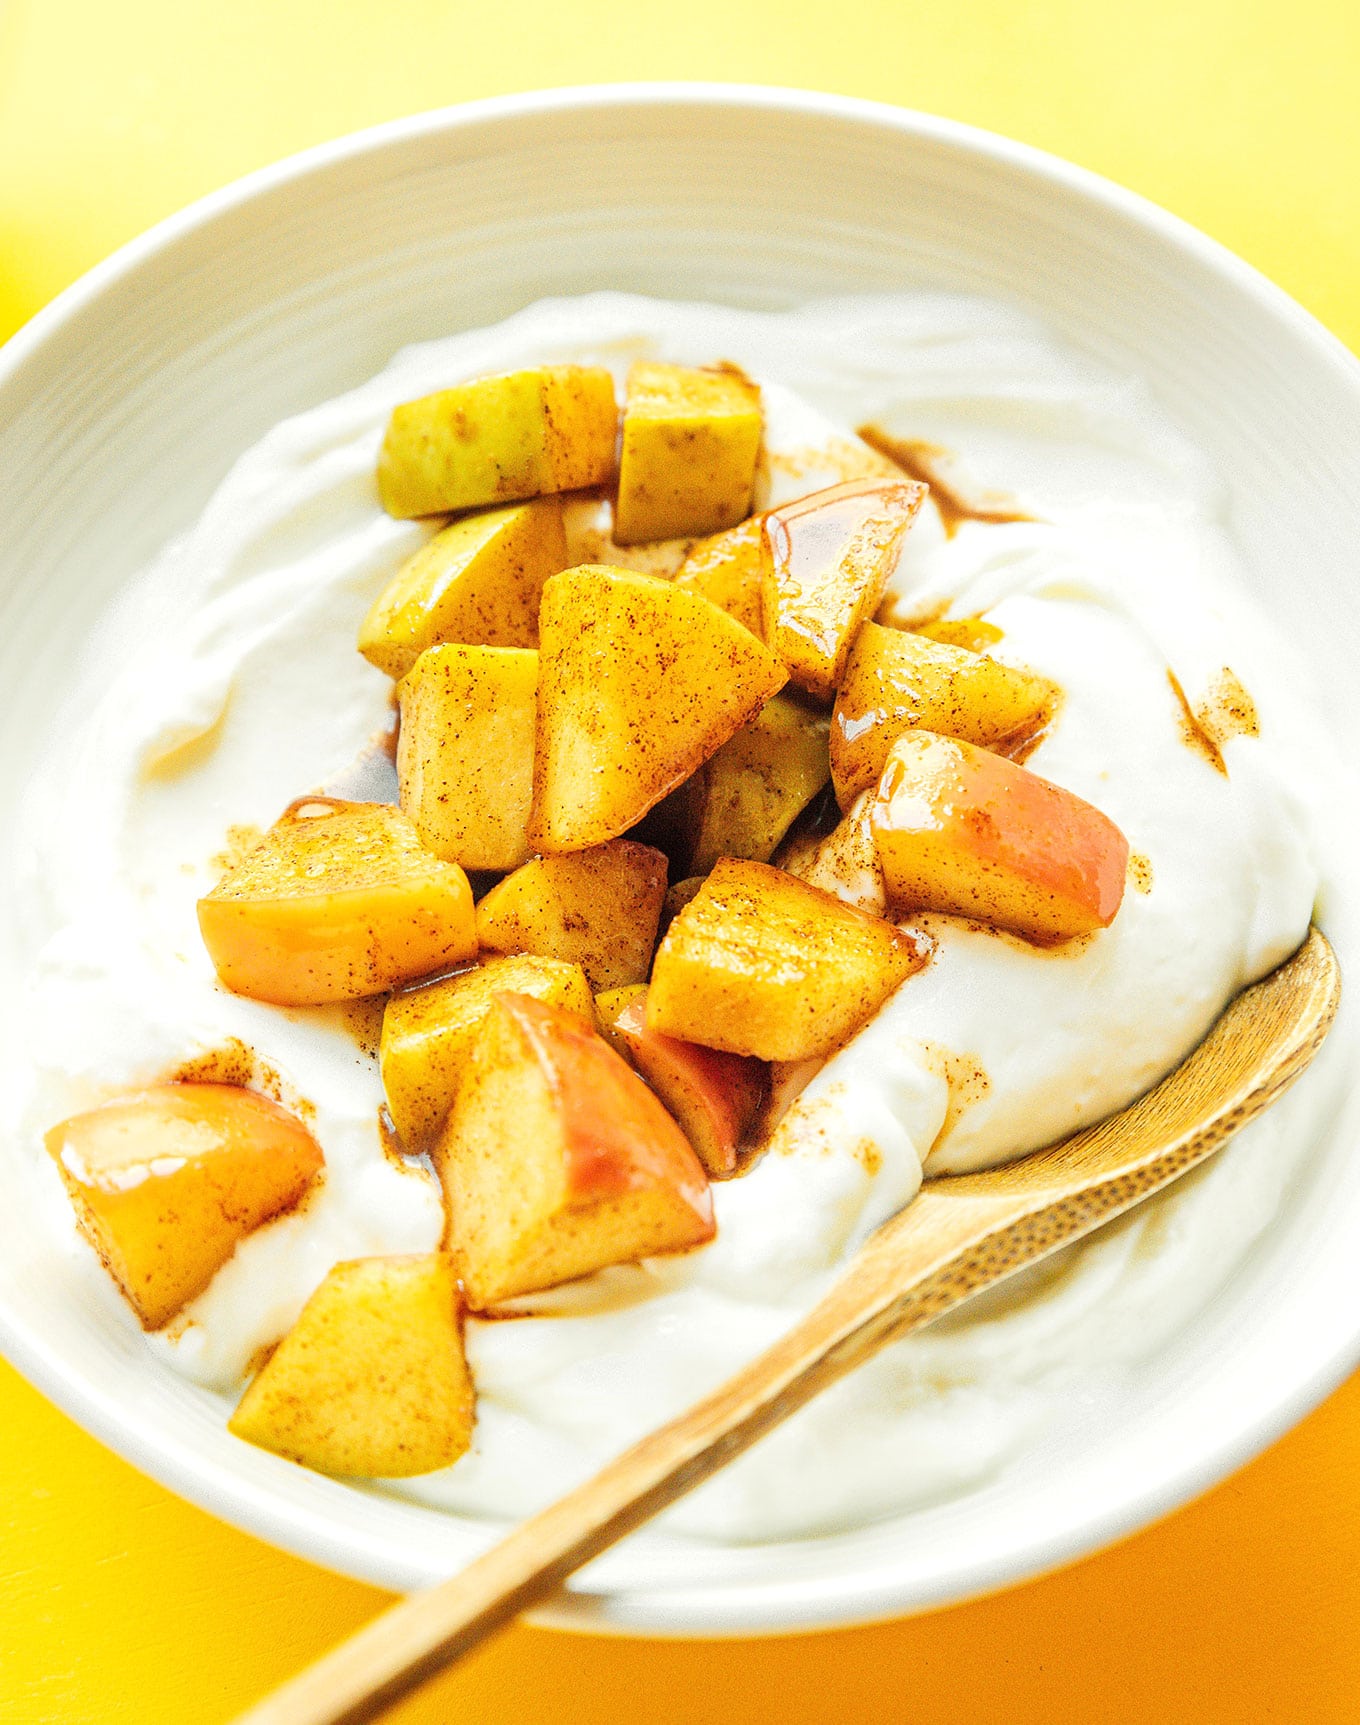 A close up view of a bowl of yogurt topped with stewed apples detailing the texture and spices of the apples